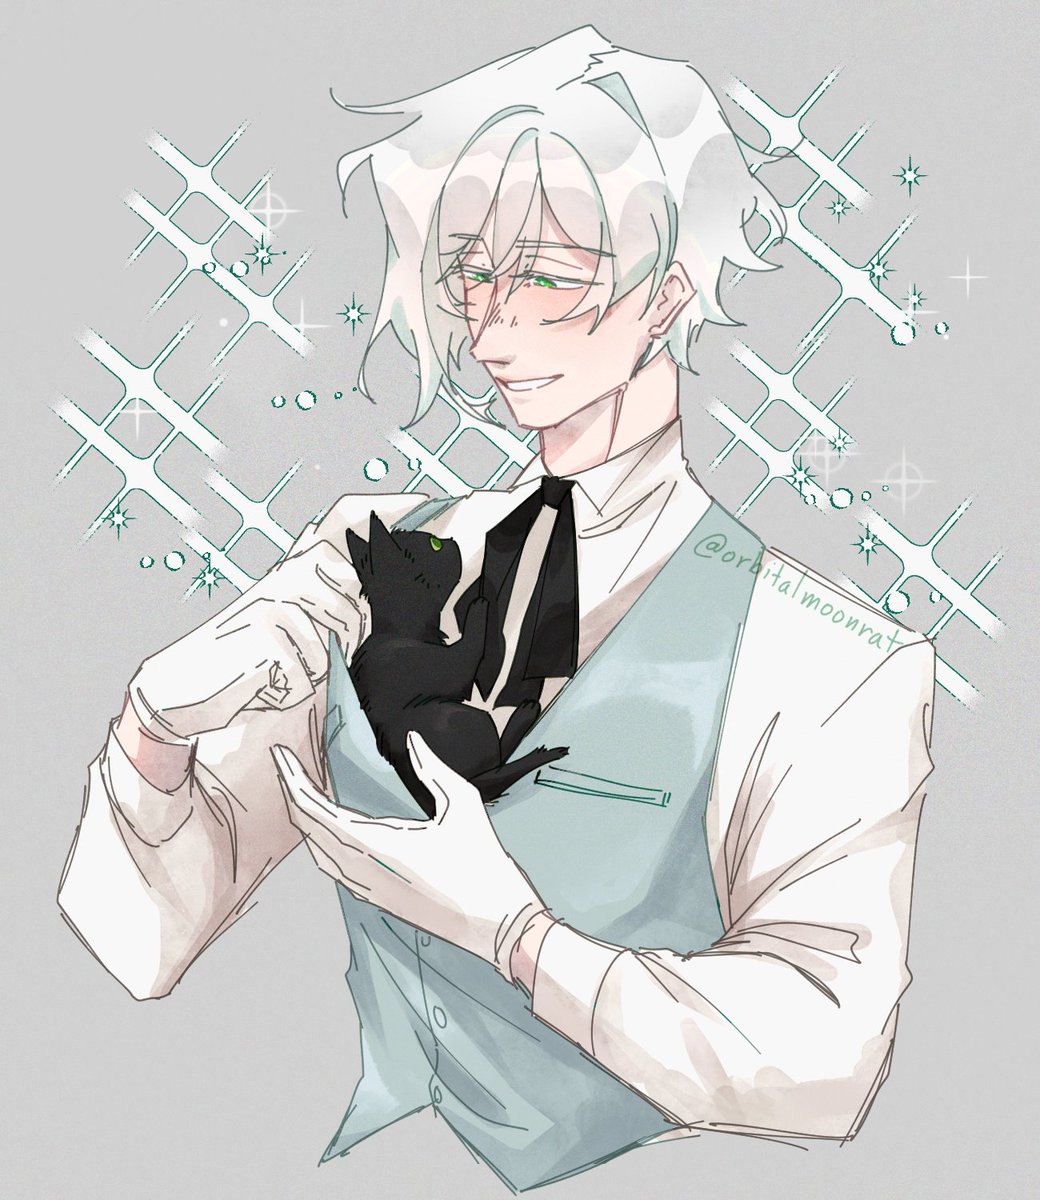 「Elzer becomes catdad 」|Nini/Lin 🐀 SO CLOSE TO GRADUATIONのイラスト